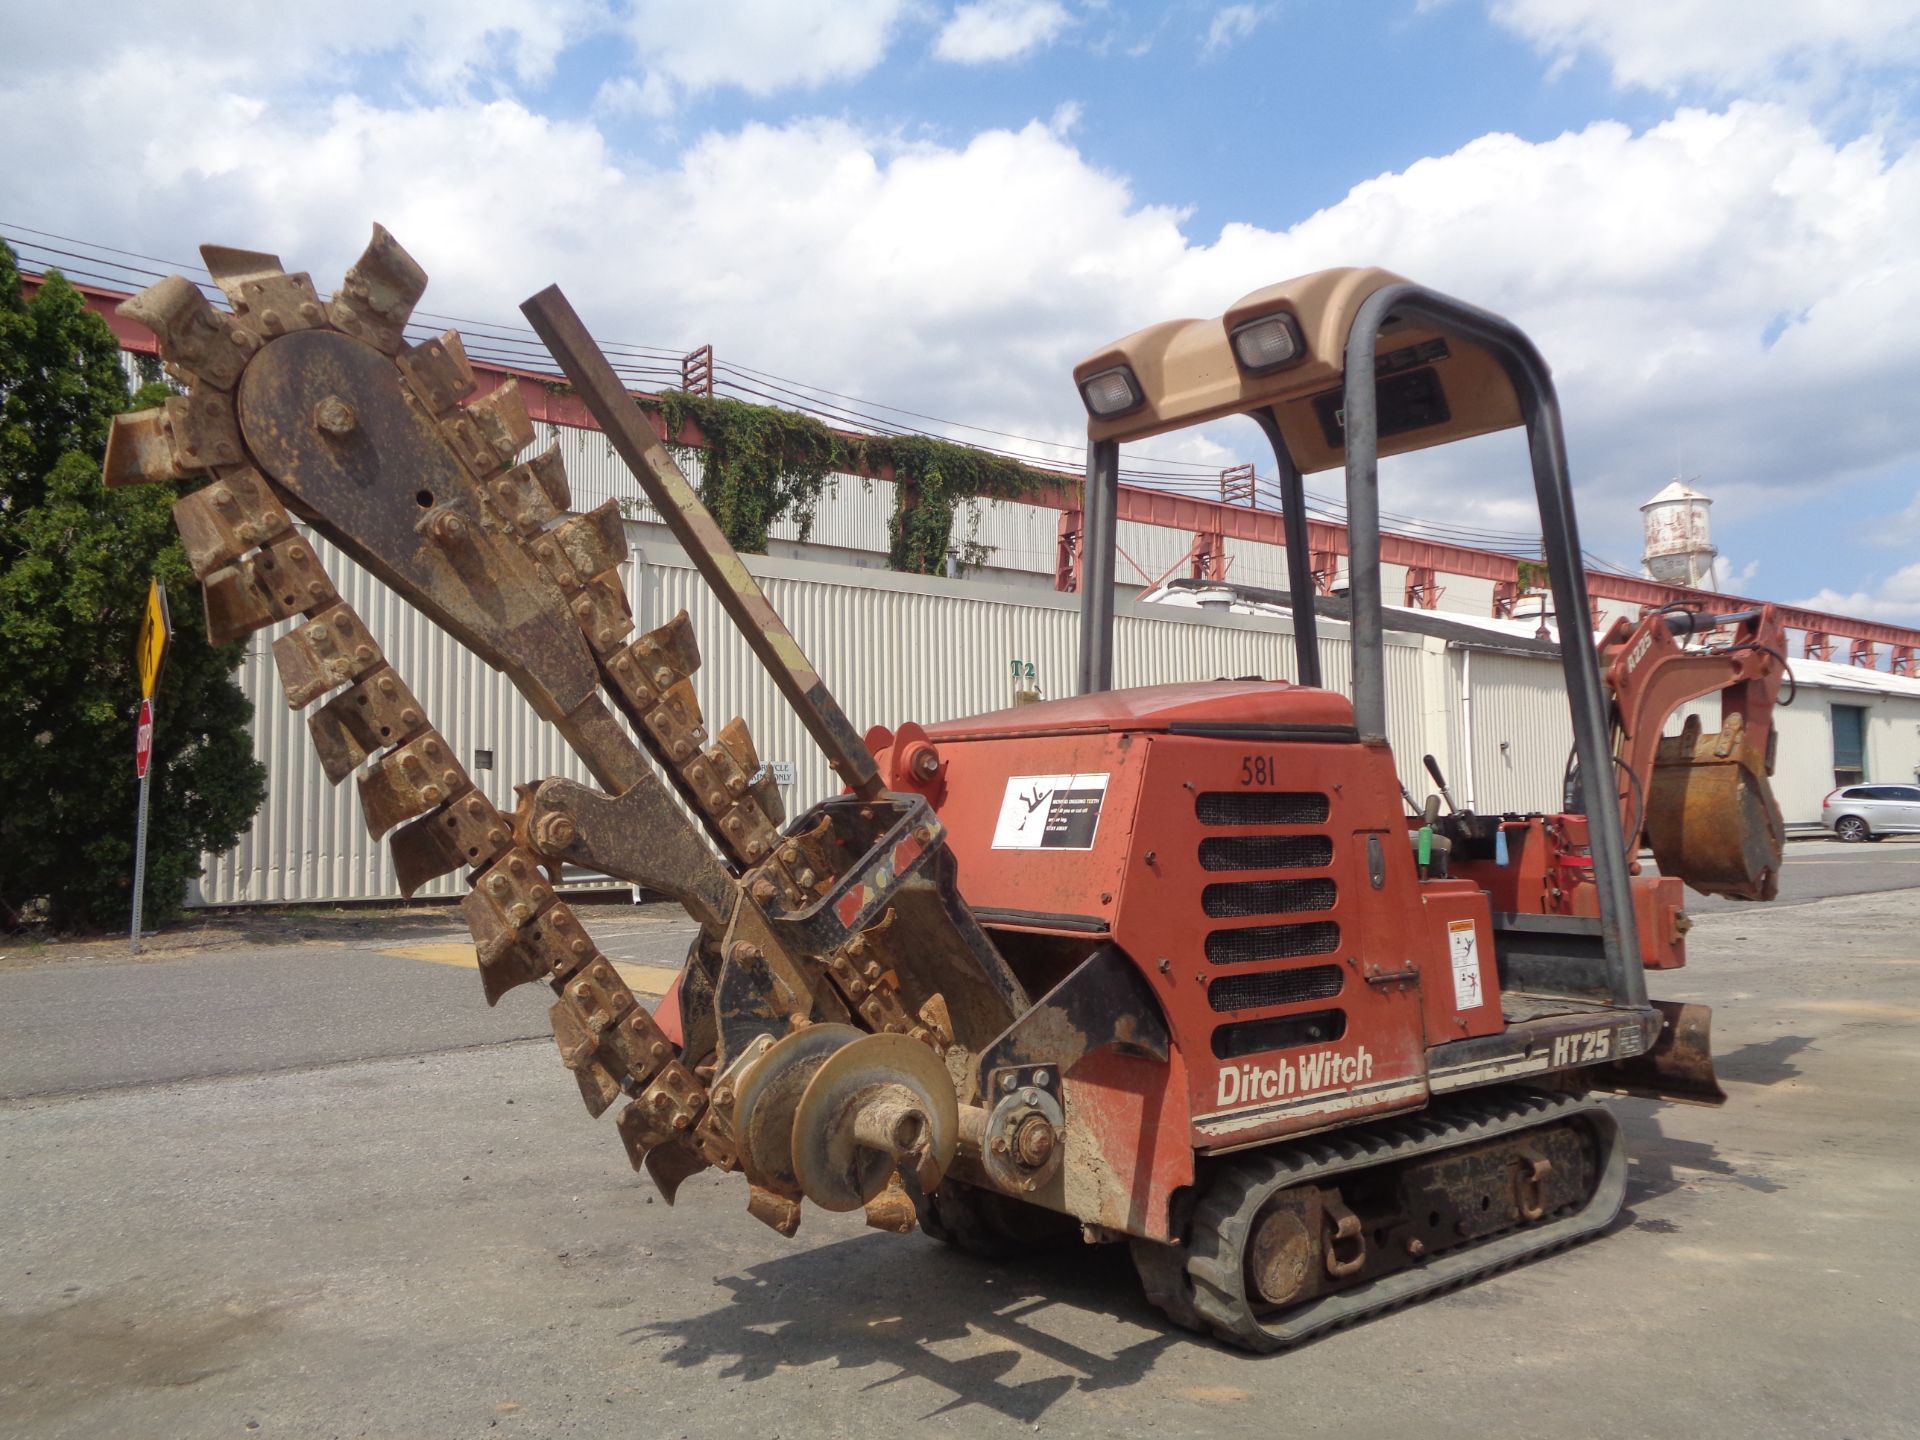 Ditch Witch HT25K Trencher and Backhoe - Image 5 of 12